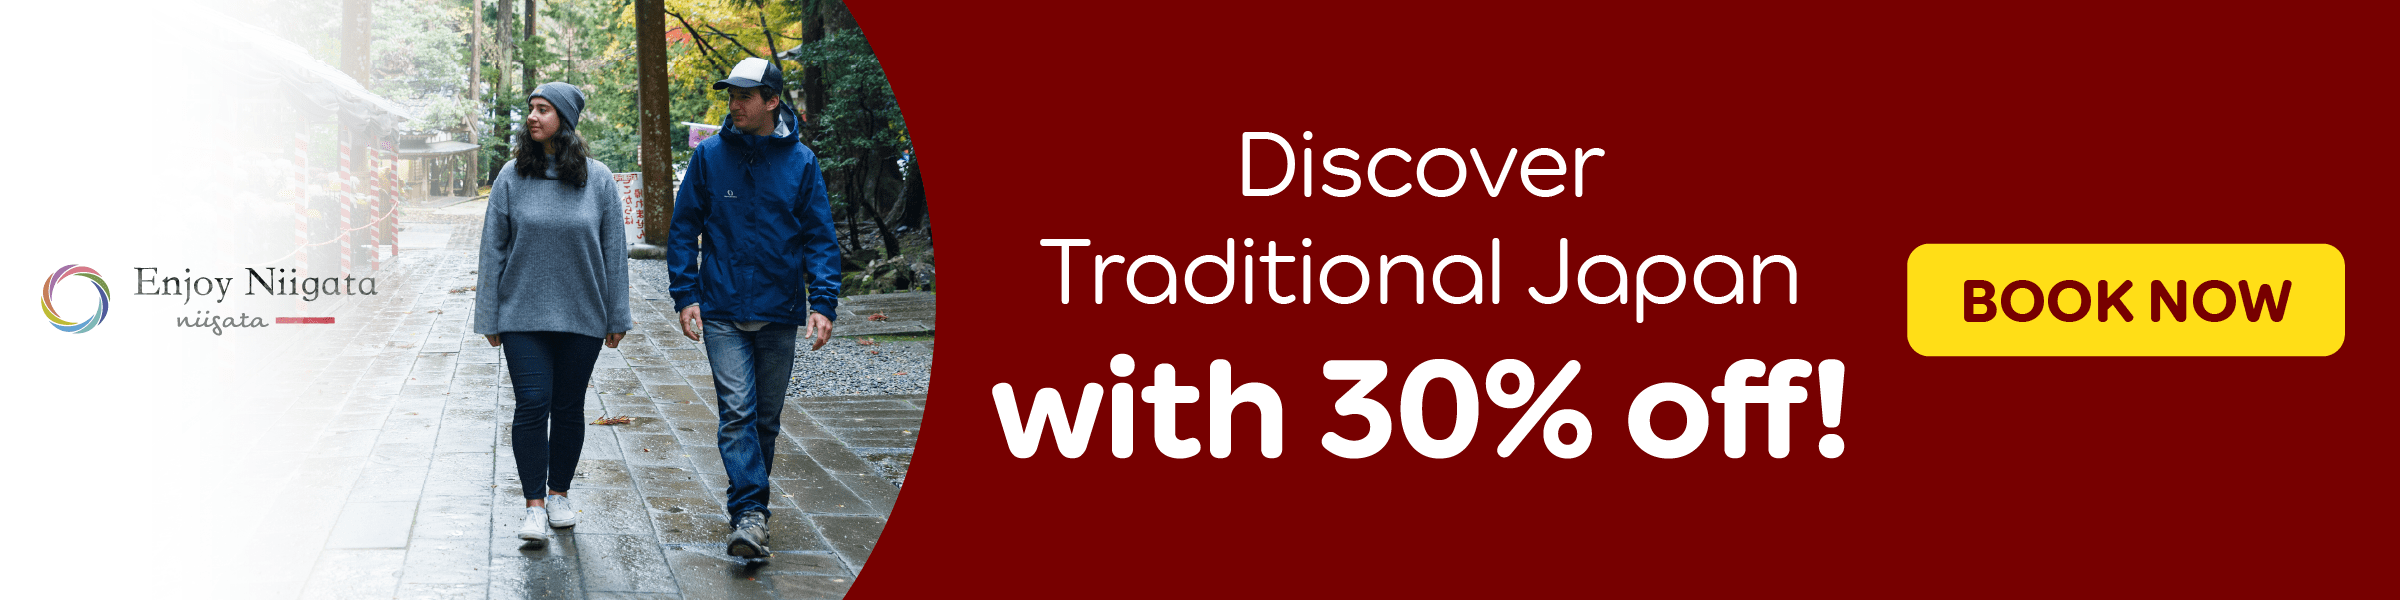 Discover Traditional Japan-banner-30 percent off hotels in Niigata